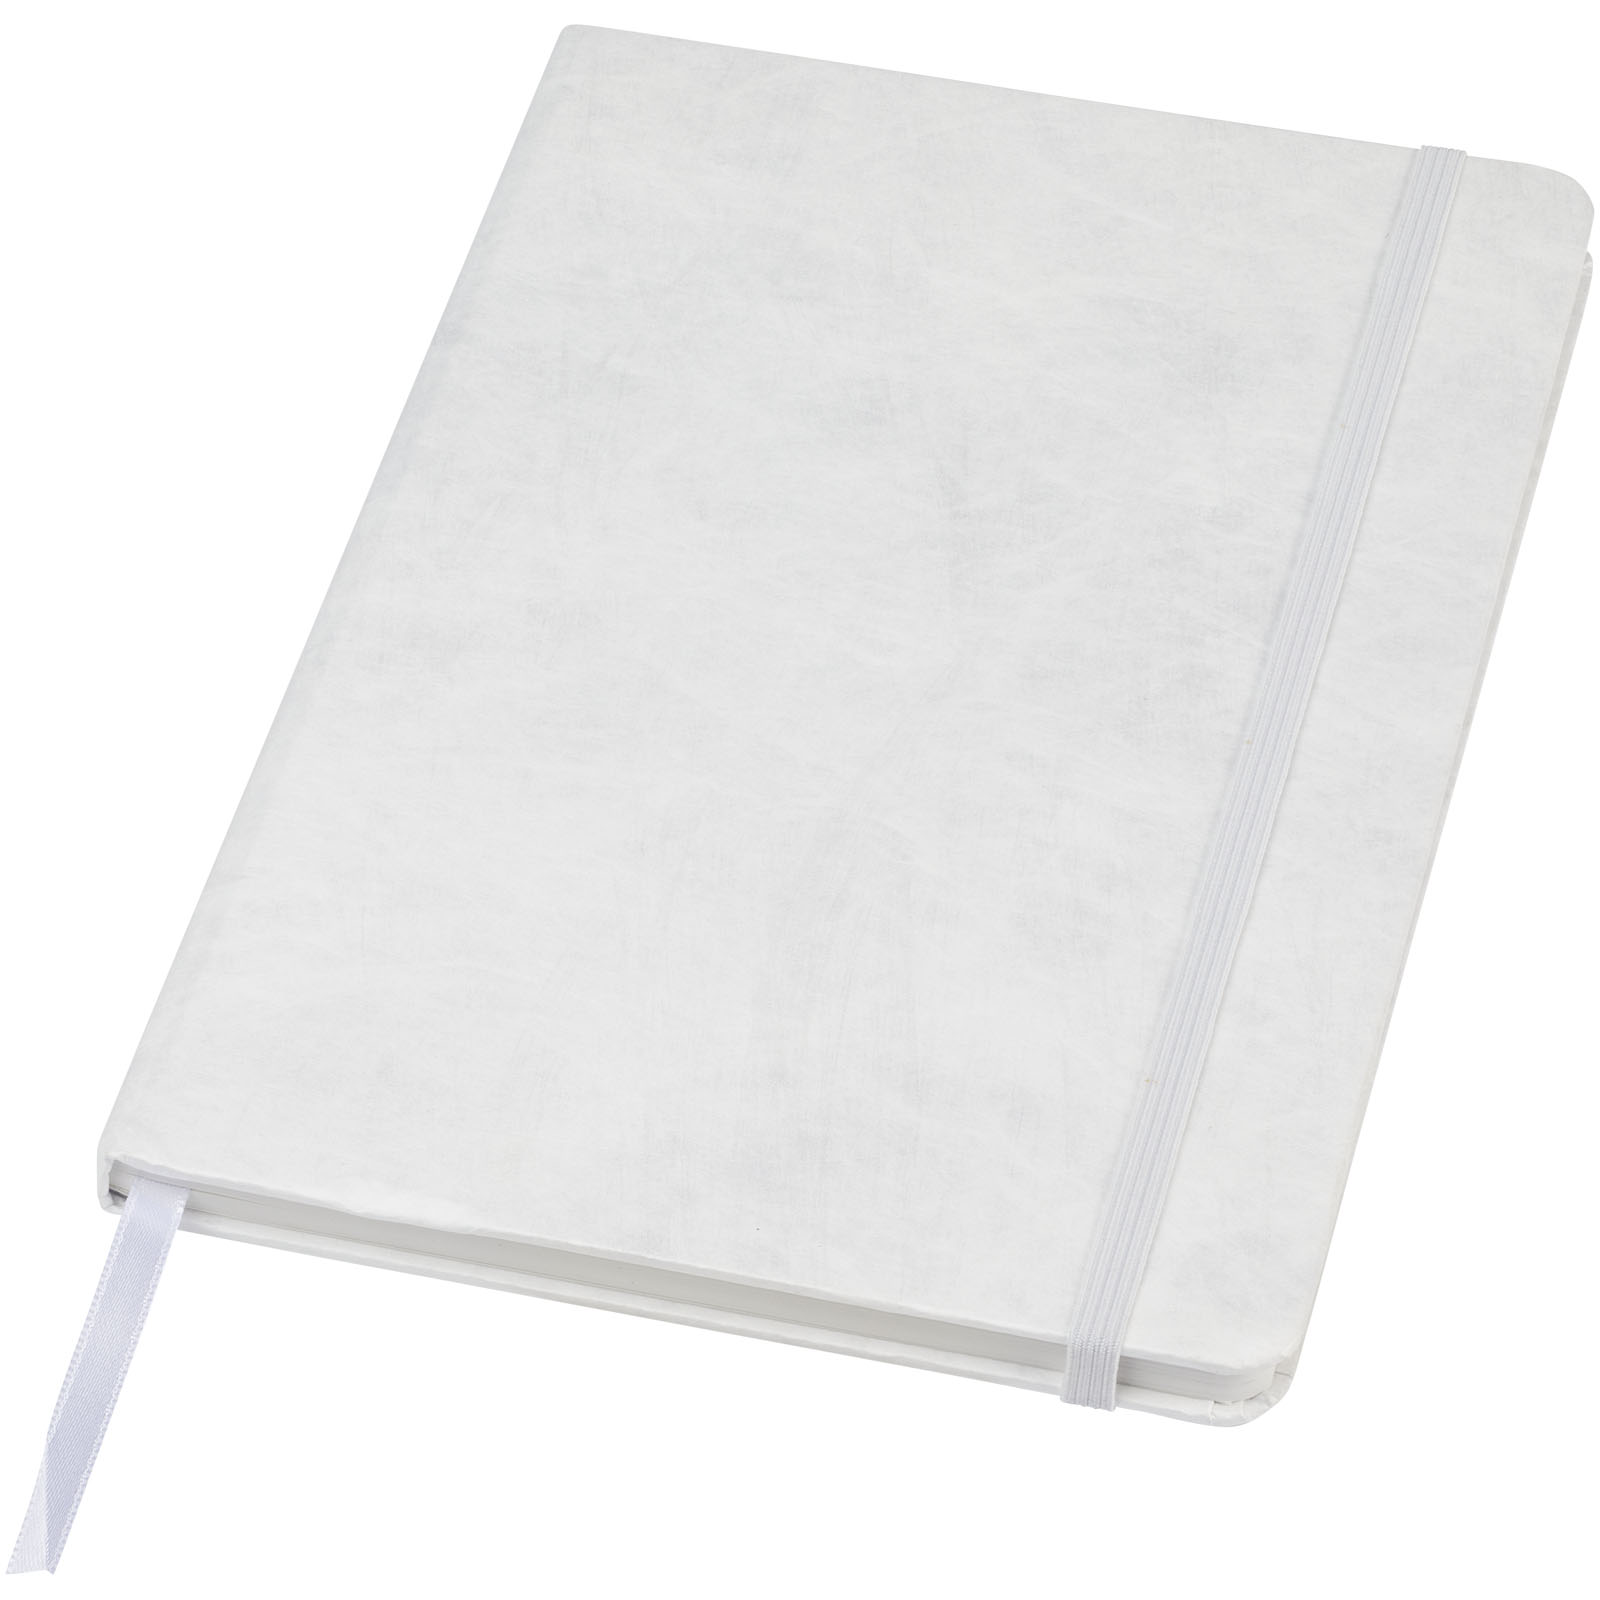 Advertising Hard cover notebooks - Breccia A5 stone paper notebook